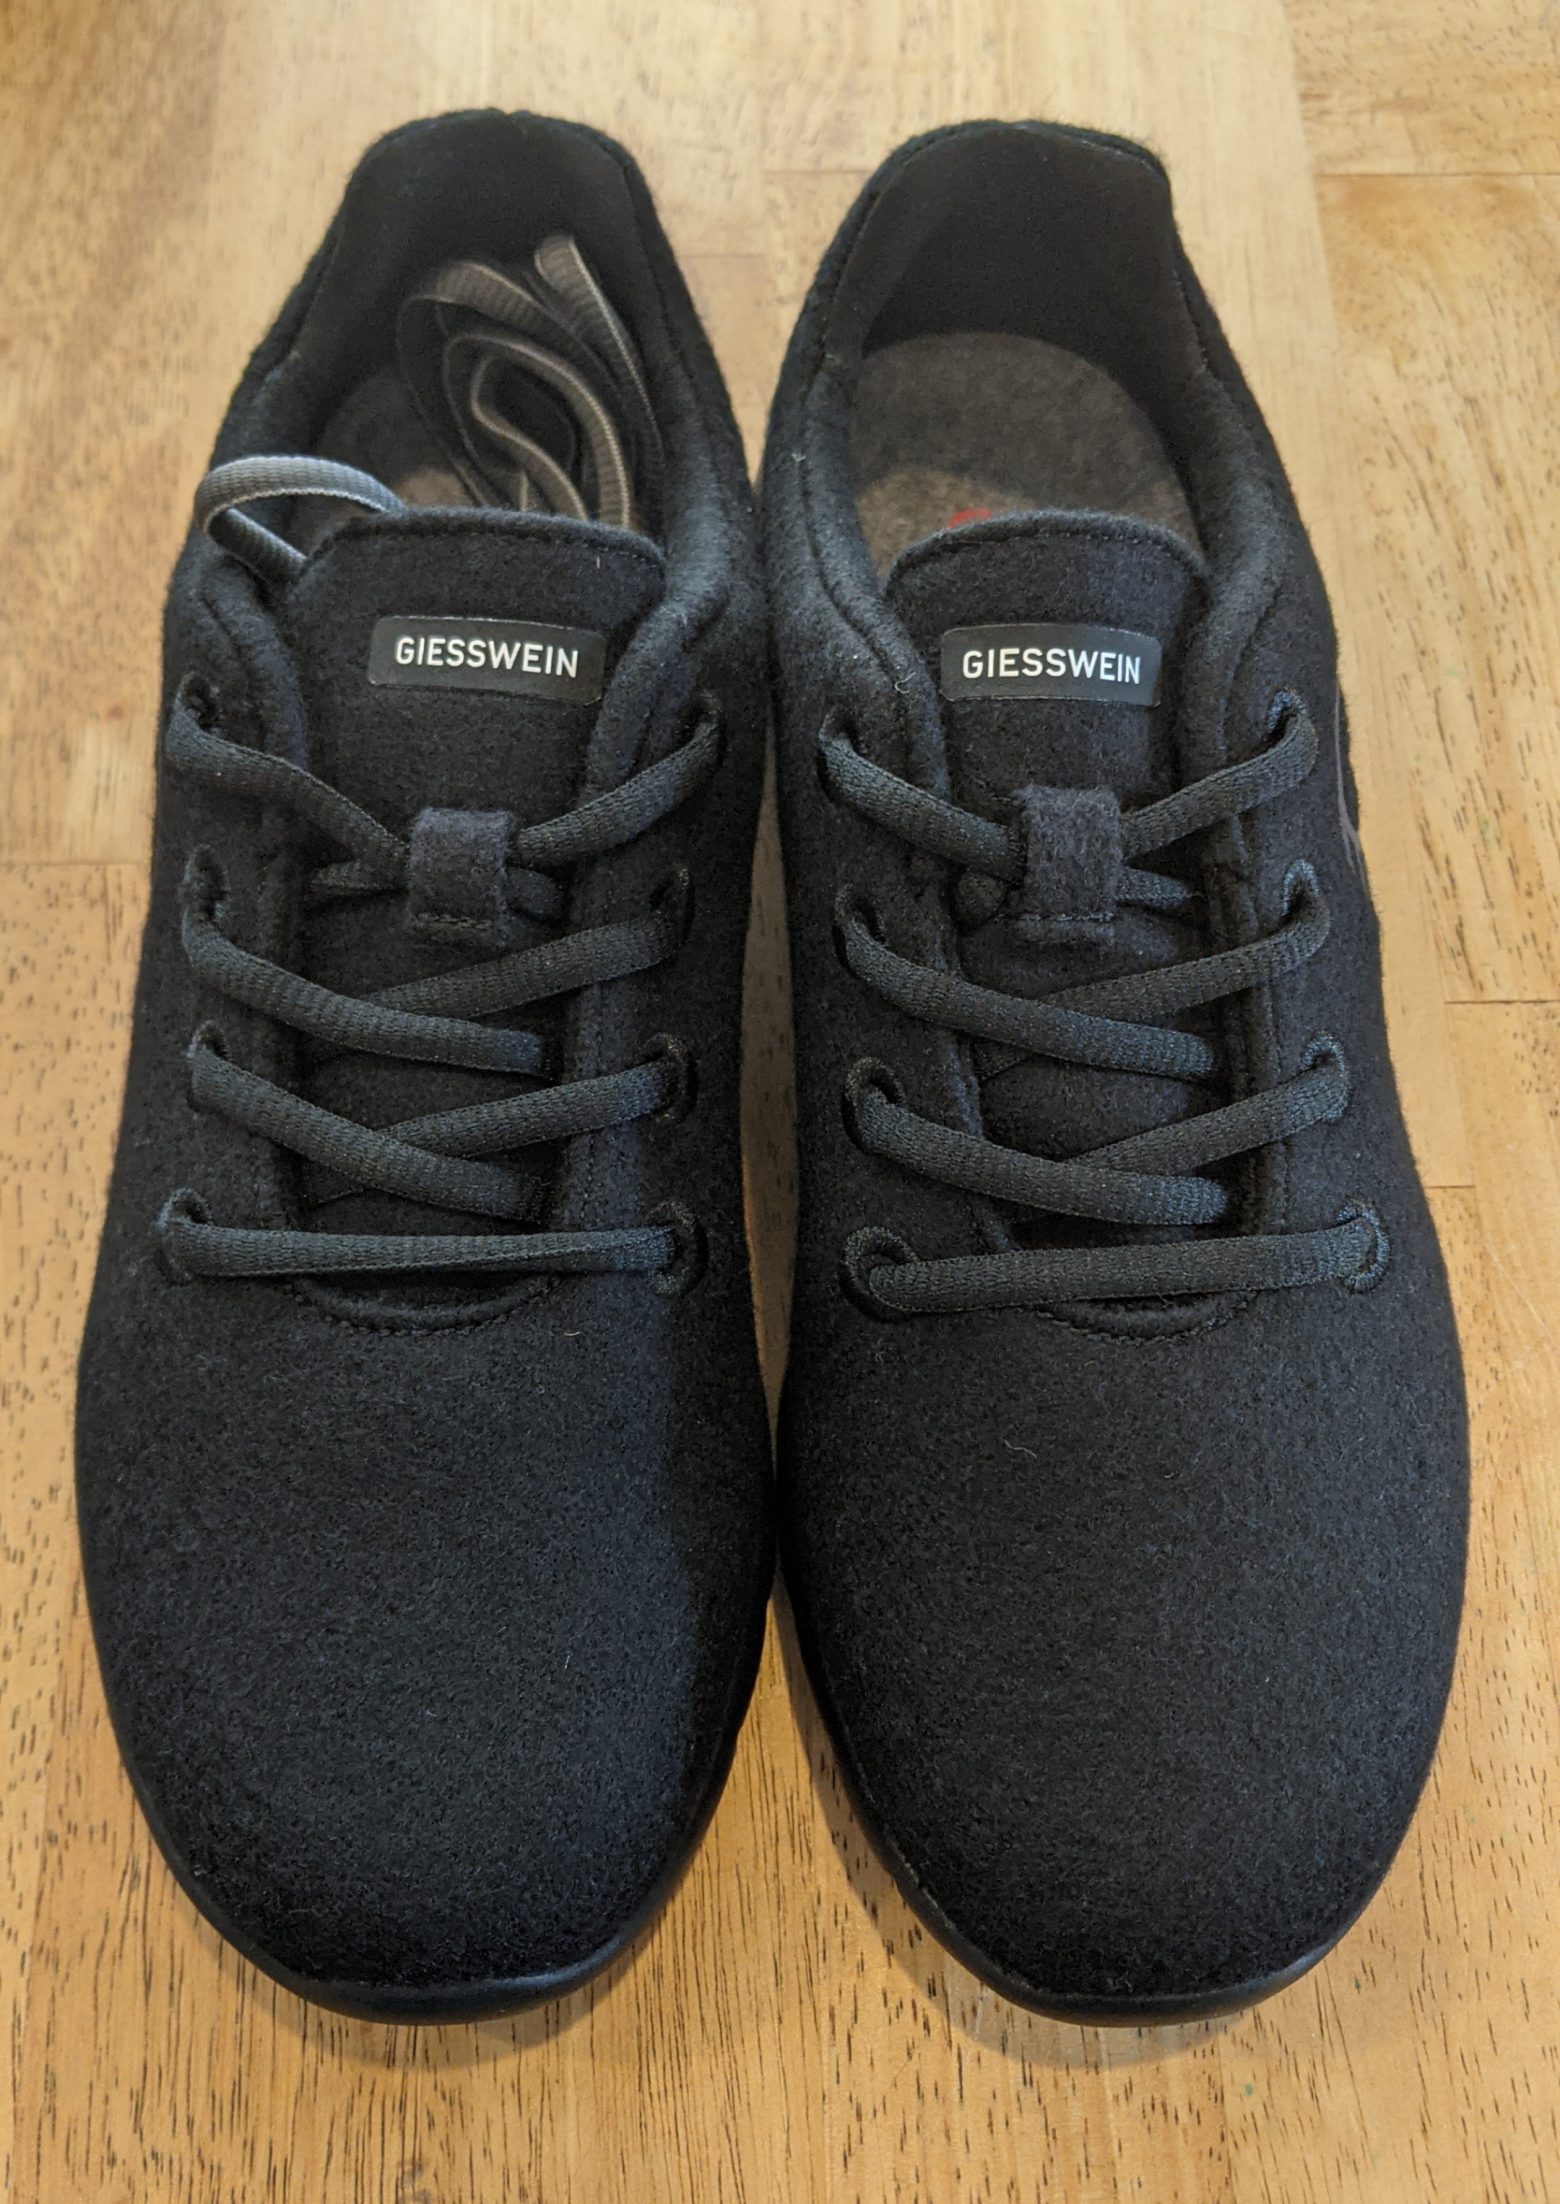 Product Review: Giesswein Shoes